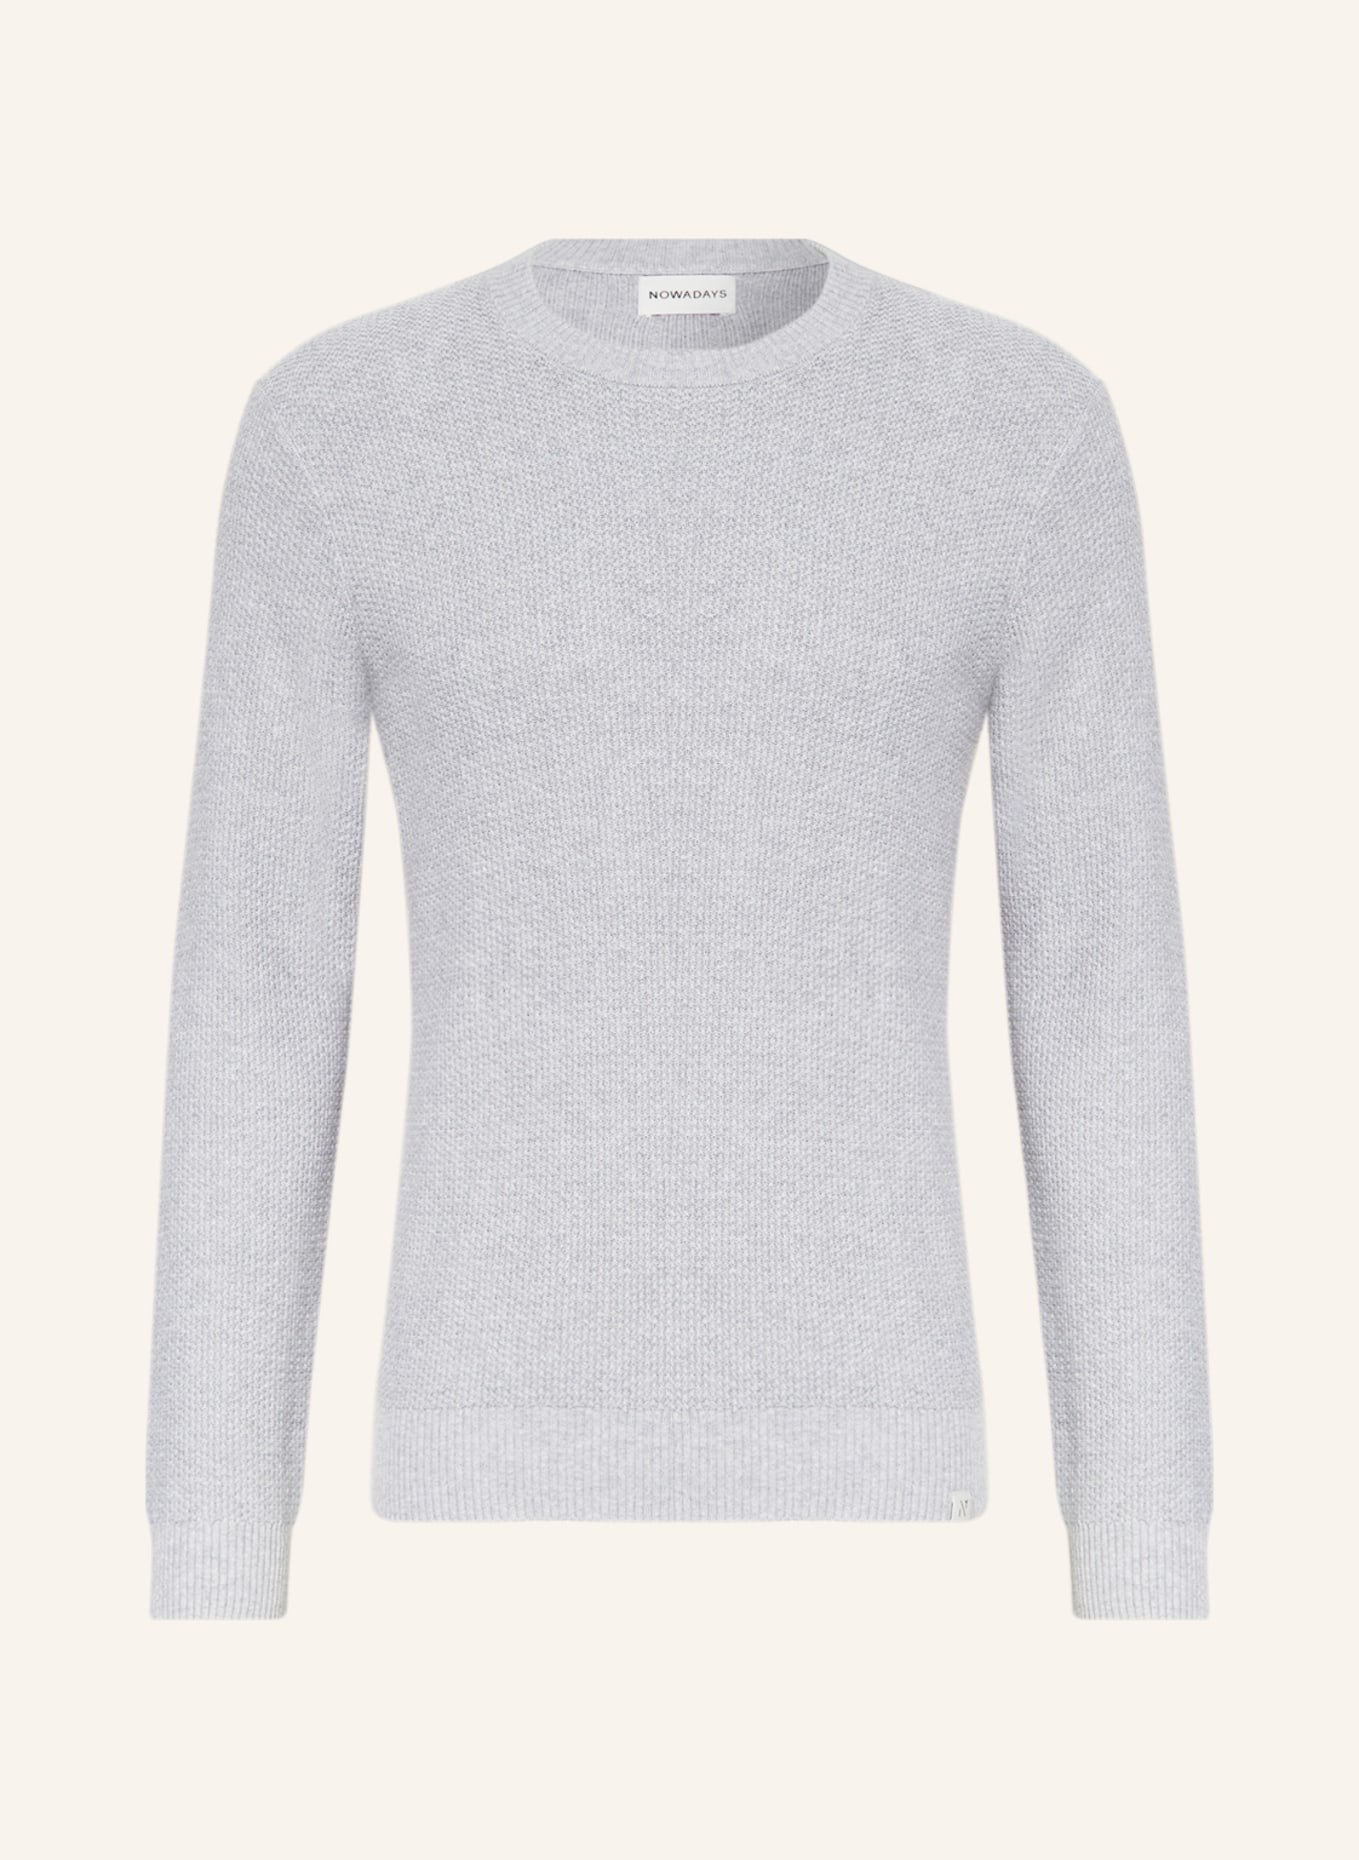 NOWADAYS Sweater, Color: LIGHT GRAY (Image 1)